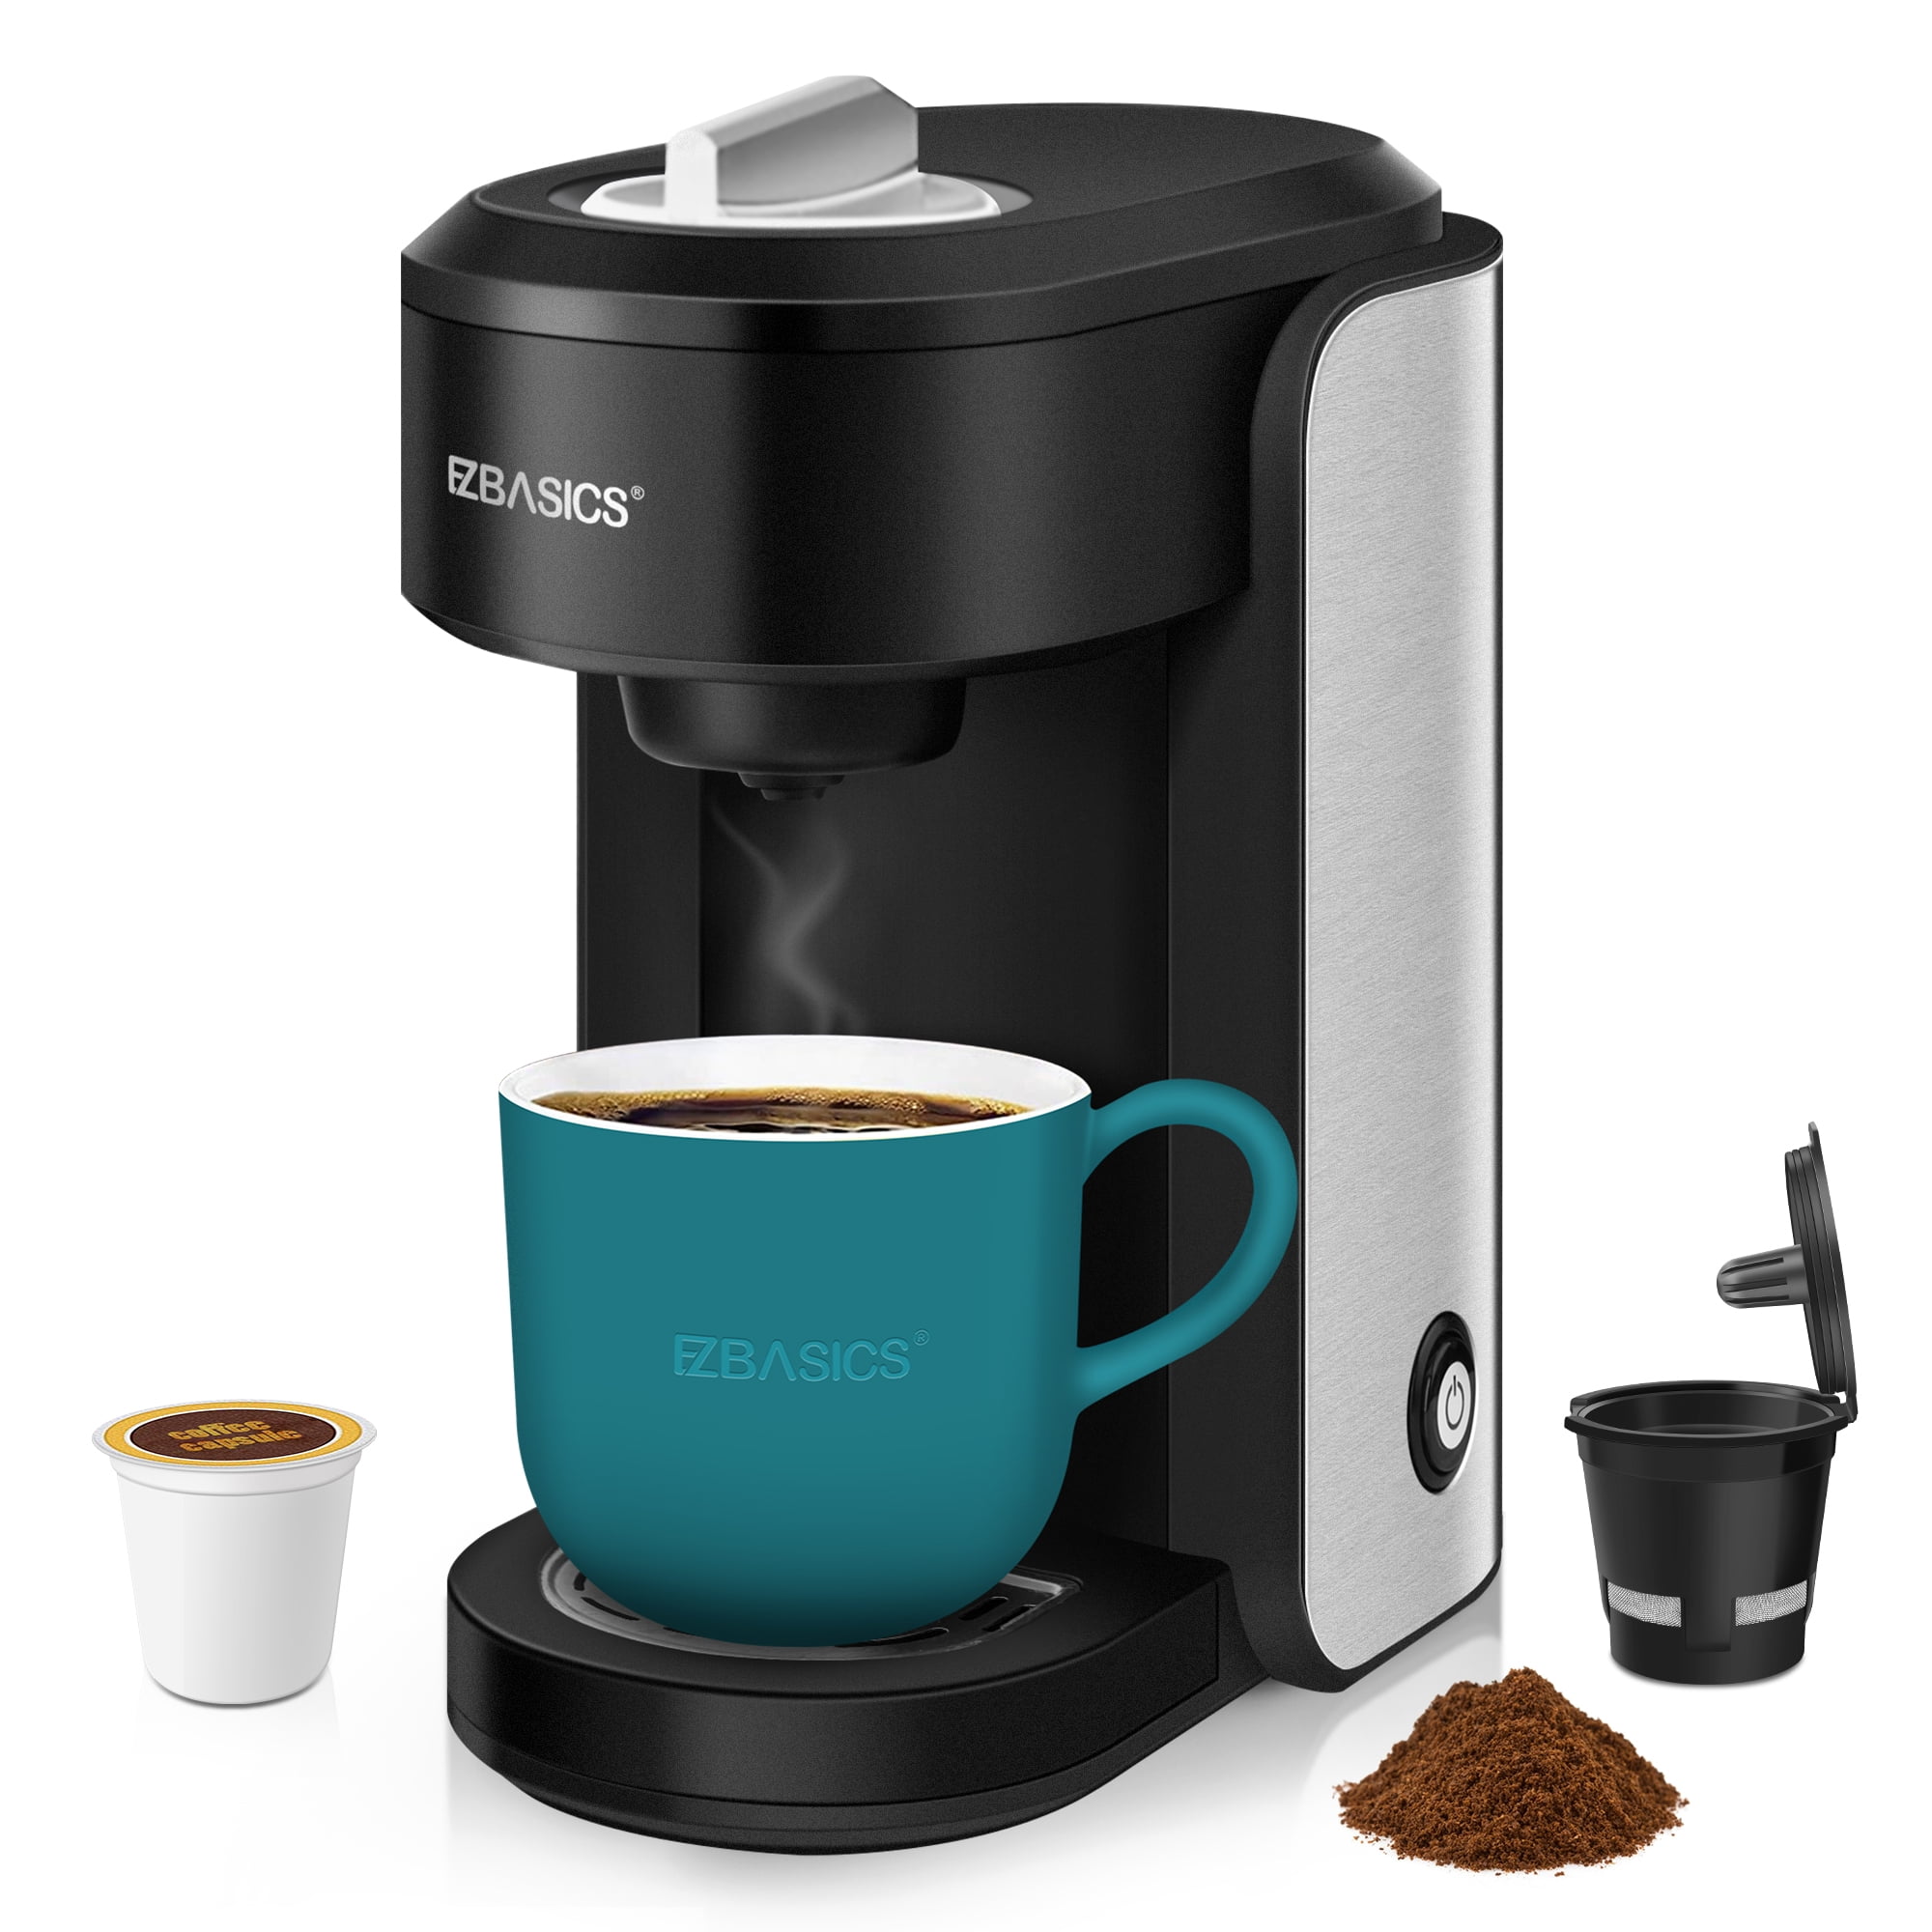 Megalesius Single Serve Coffee Maker, 2 In 1 Mini Coffee Maker For Single  Cup Pods & Ground Coffee, 10 Oz Brew Sizes, One Cup Coffee Maker With  One-Button Control, Rapid Brew 